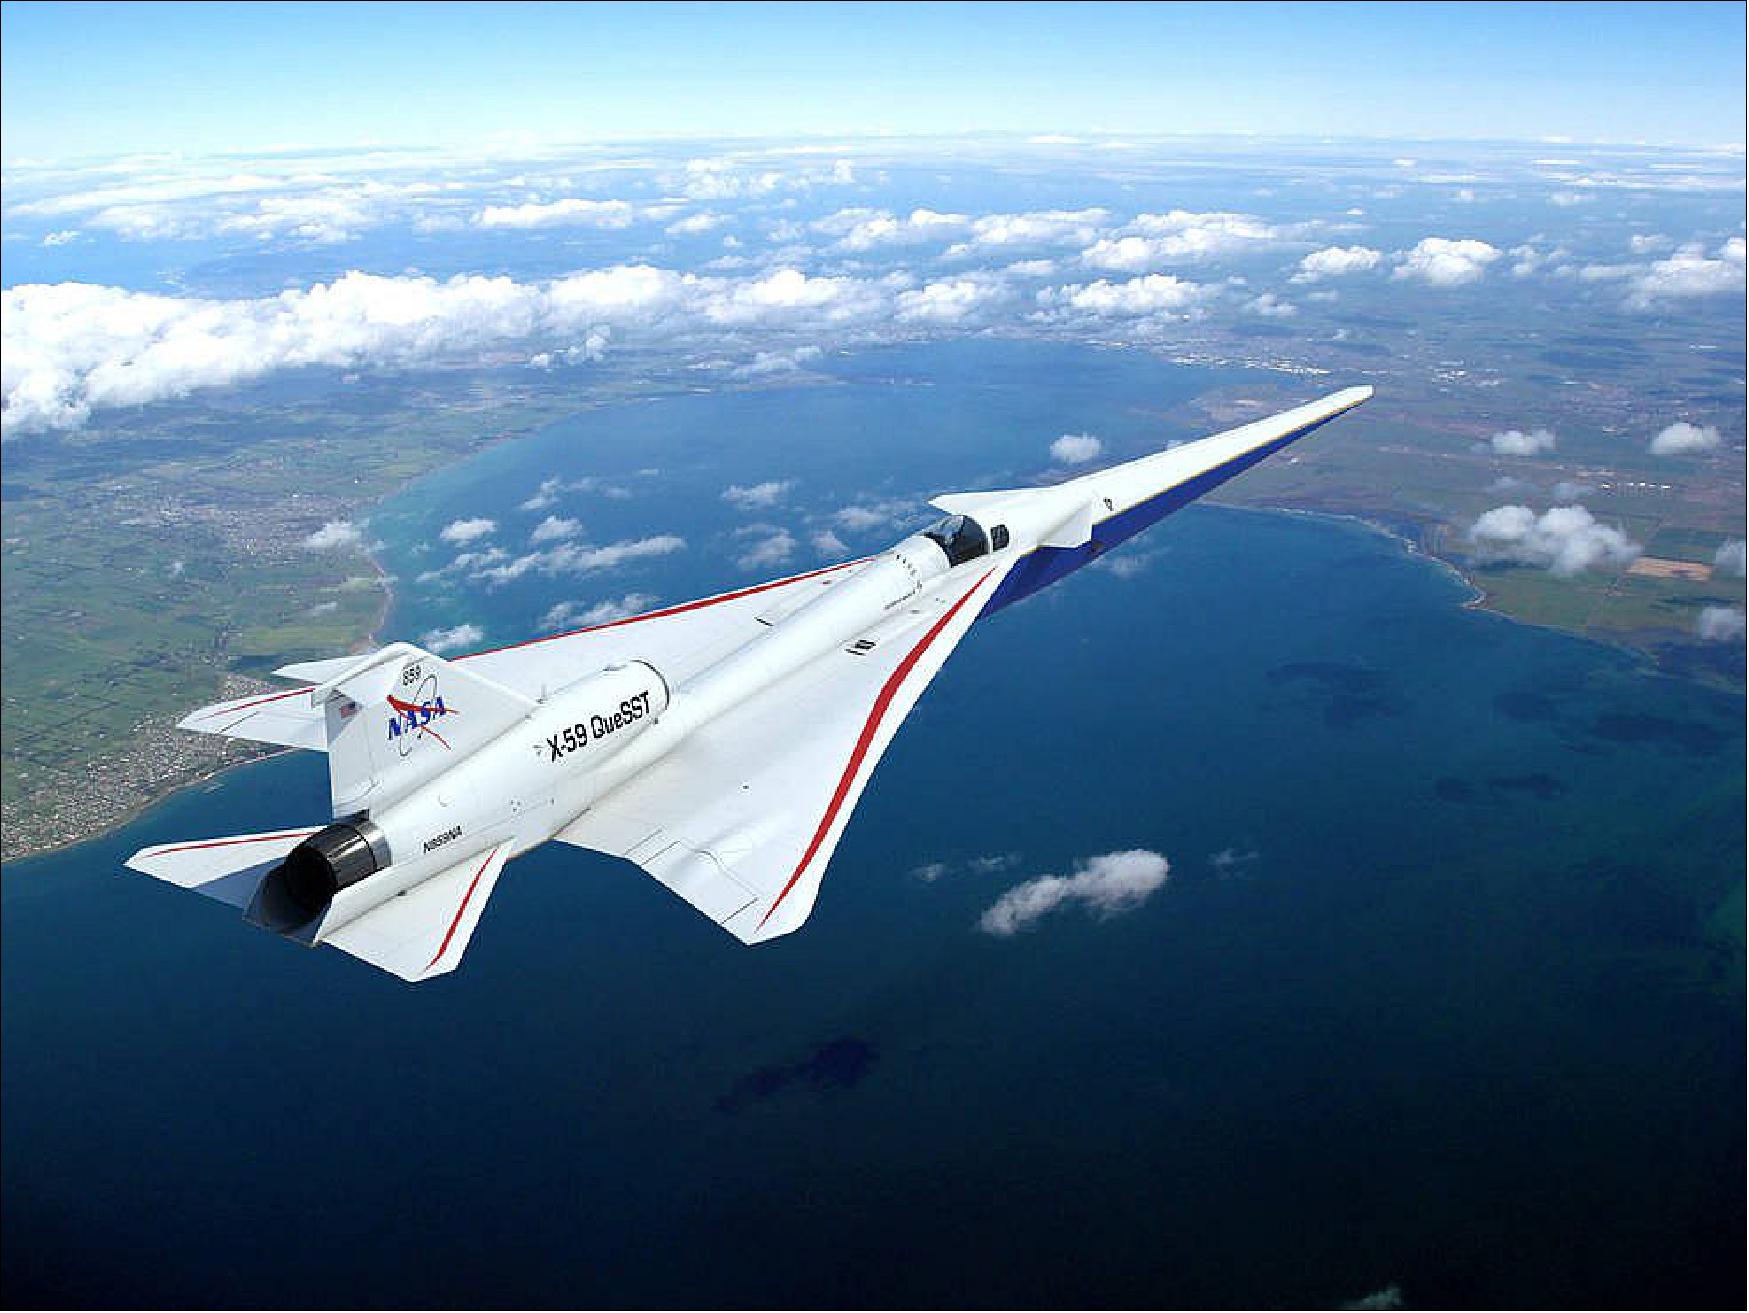 Figure 6: This composite image, which includes an illustration of NASA's X-59 research aircraft, shows the airplane's final configuration following years of research and design engineering. The single-pilot aircraft is now under construction at Lockheed Martin's Skunk Works facility in Palmdale, California (image credit: Lockheed Martin)